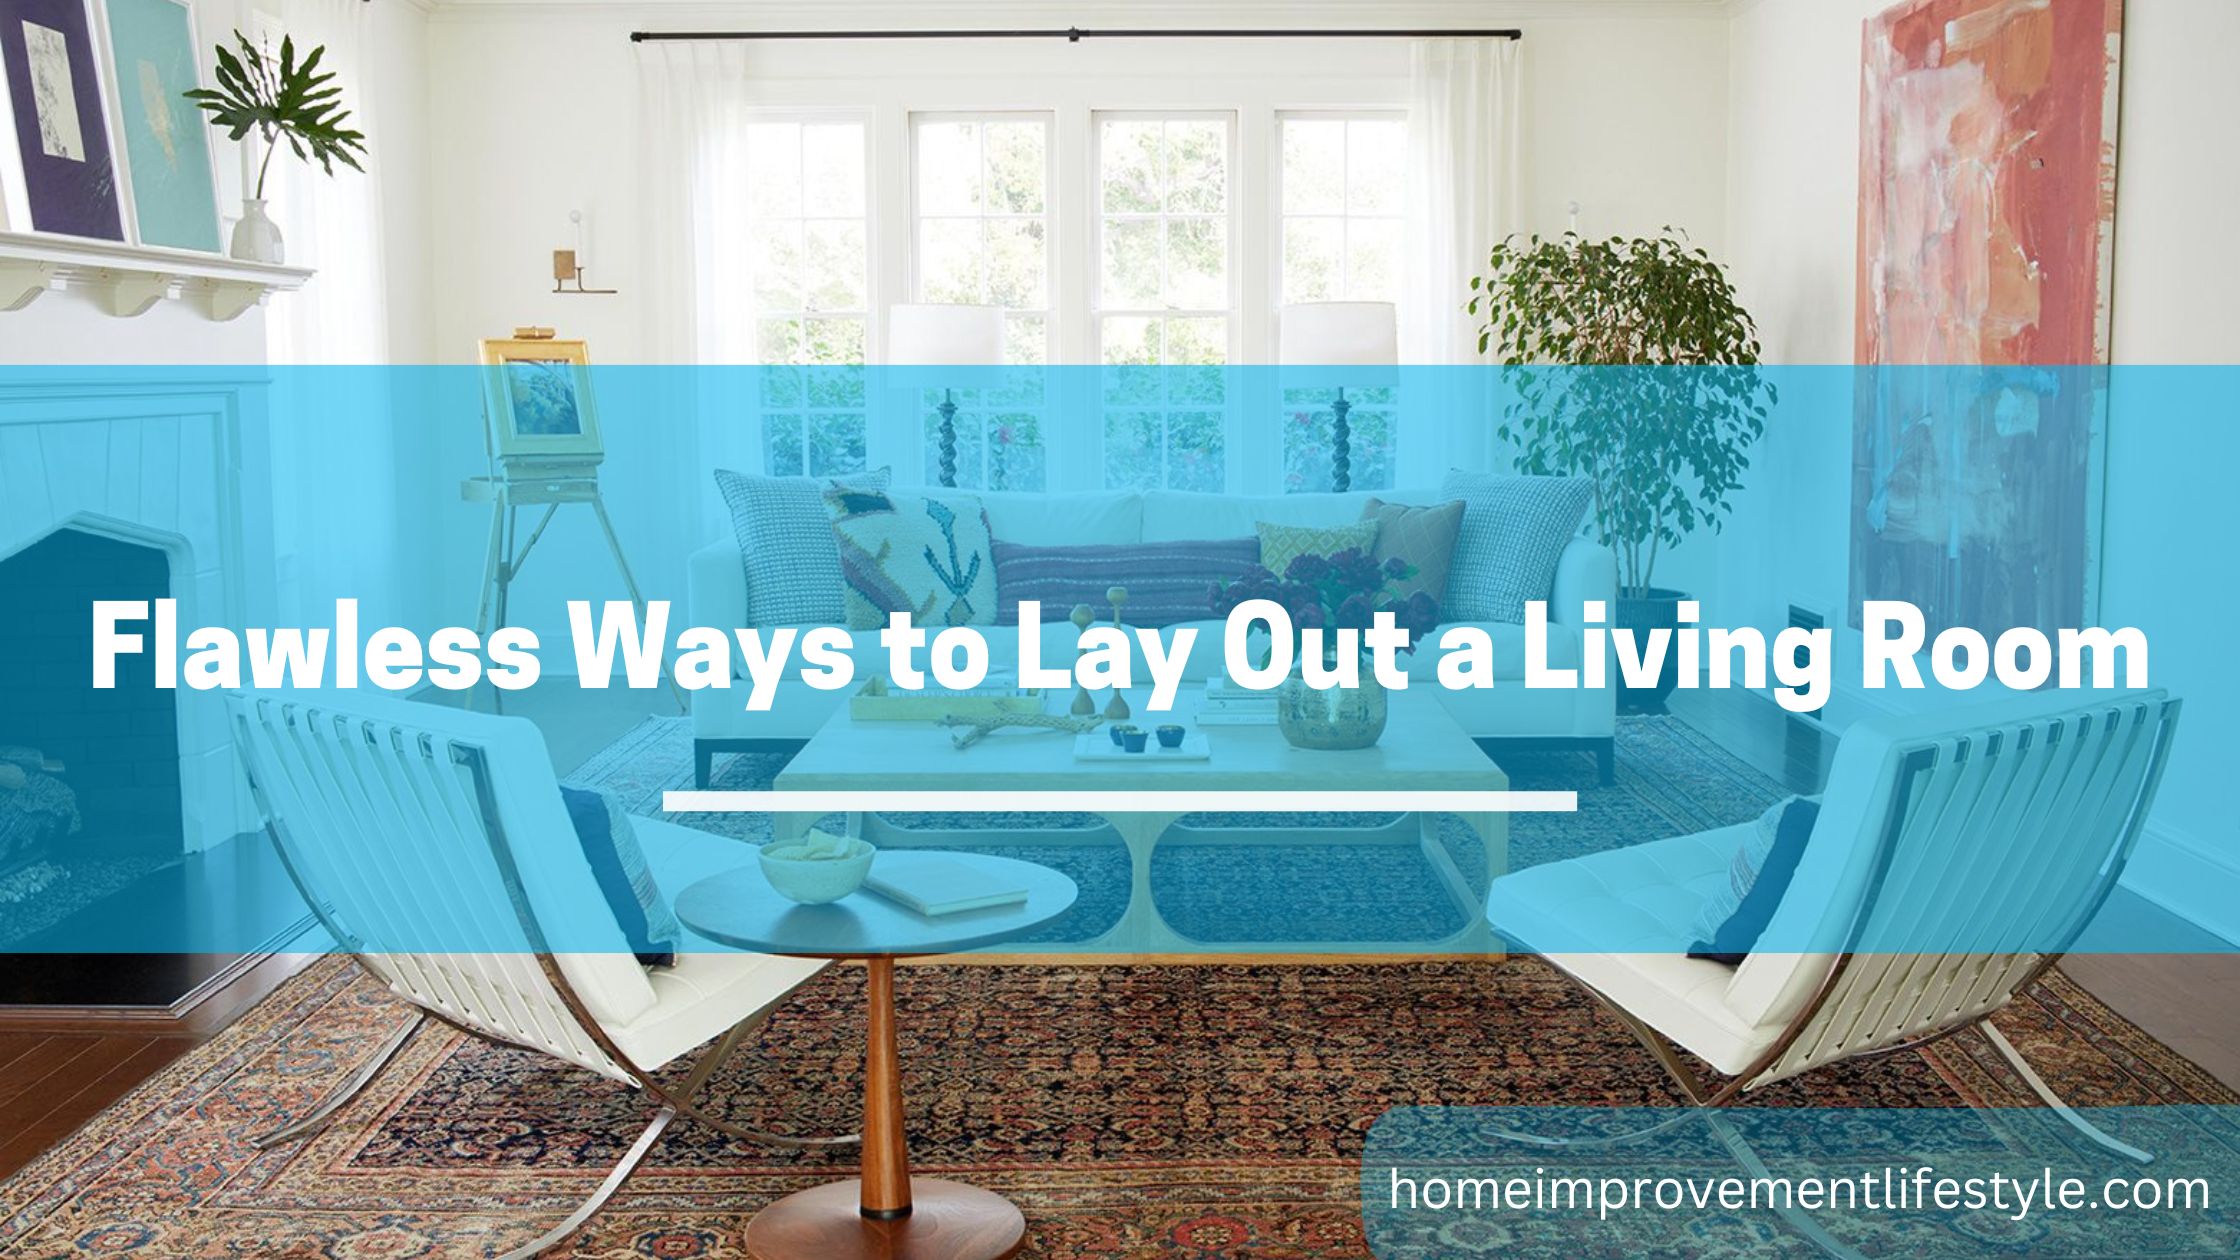 Flawless Ways to Lay Out a Living Room